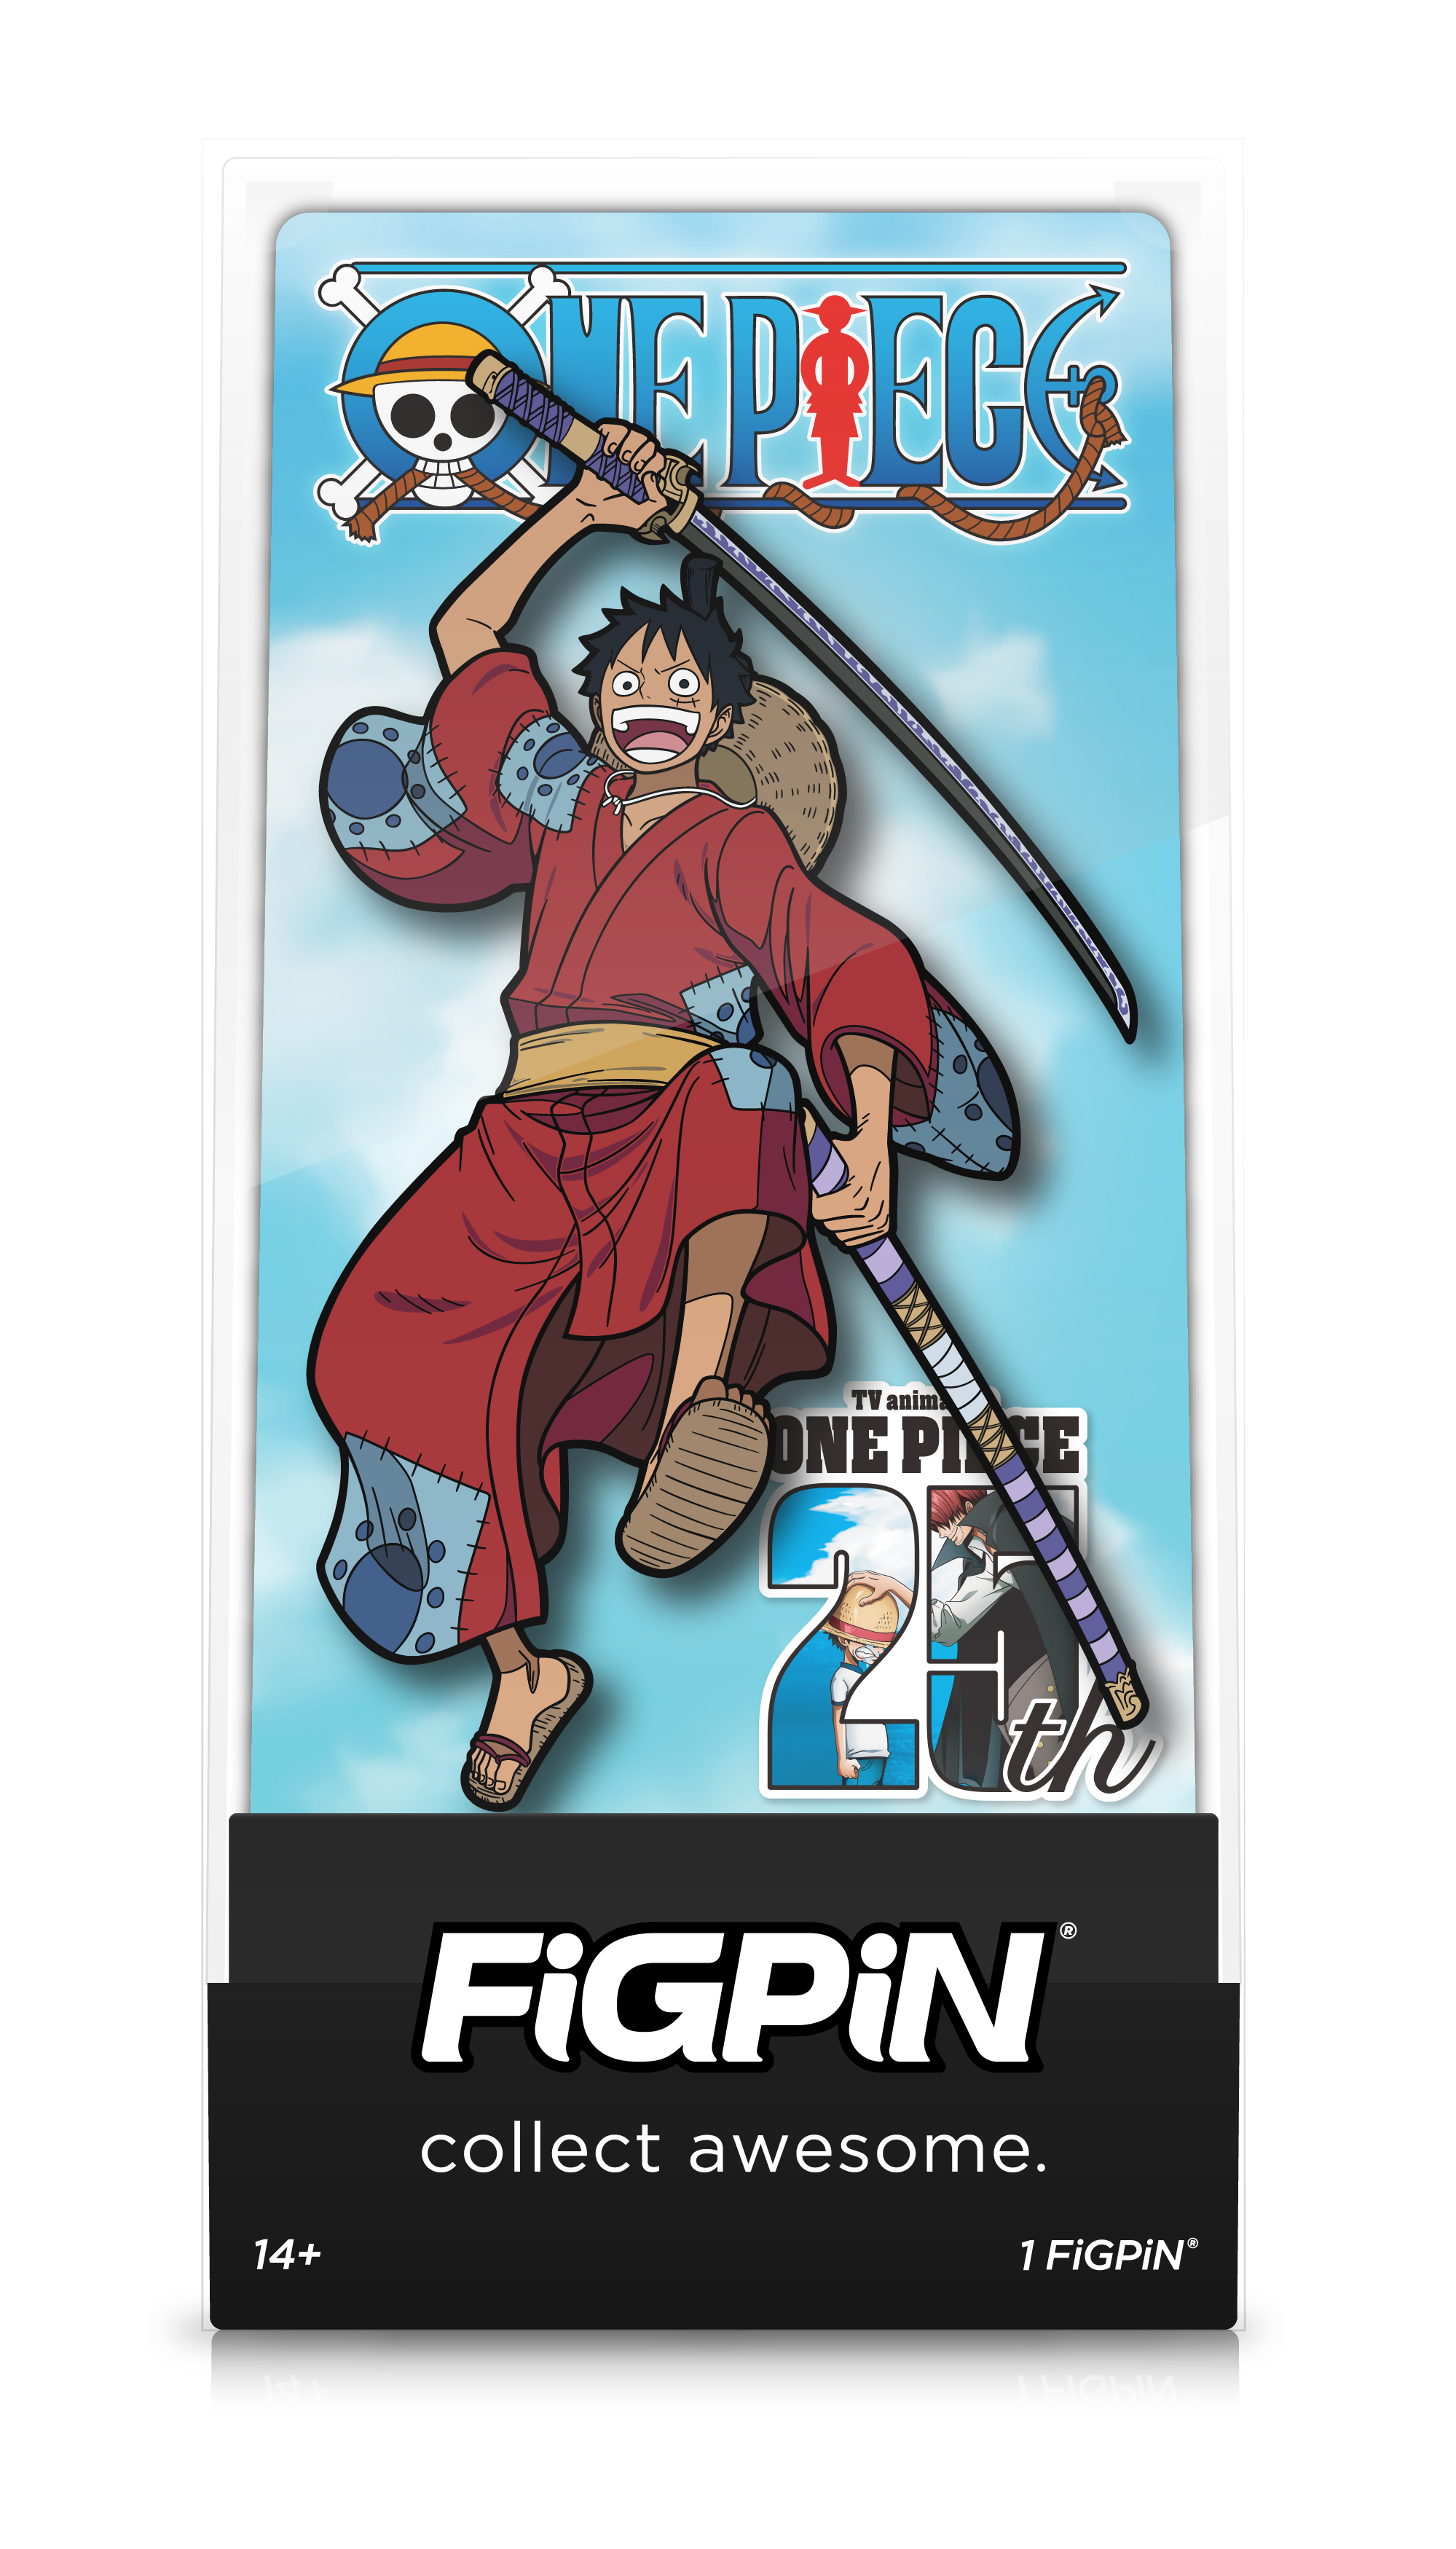 Front view of Luffytaro enamel pin inside FiGPiN Display case reading “FiGPiN - collect awesome”